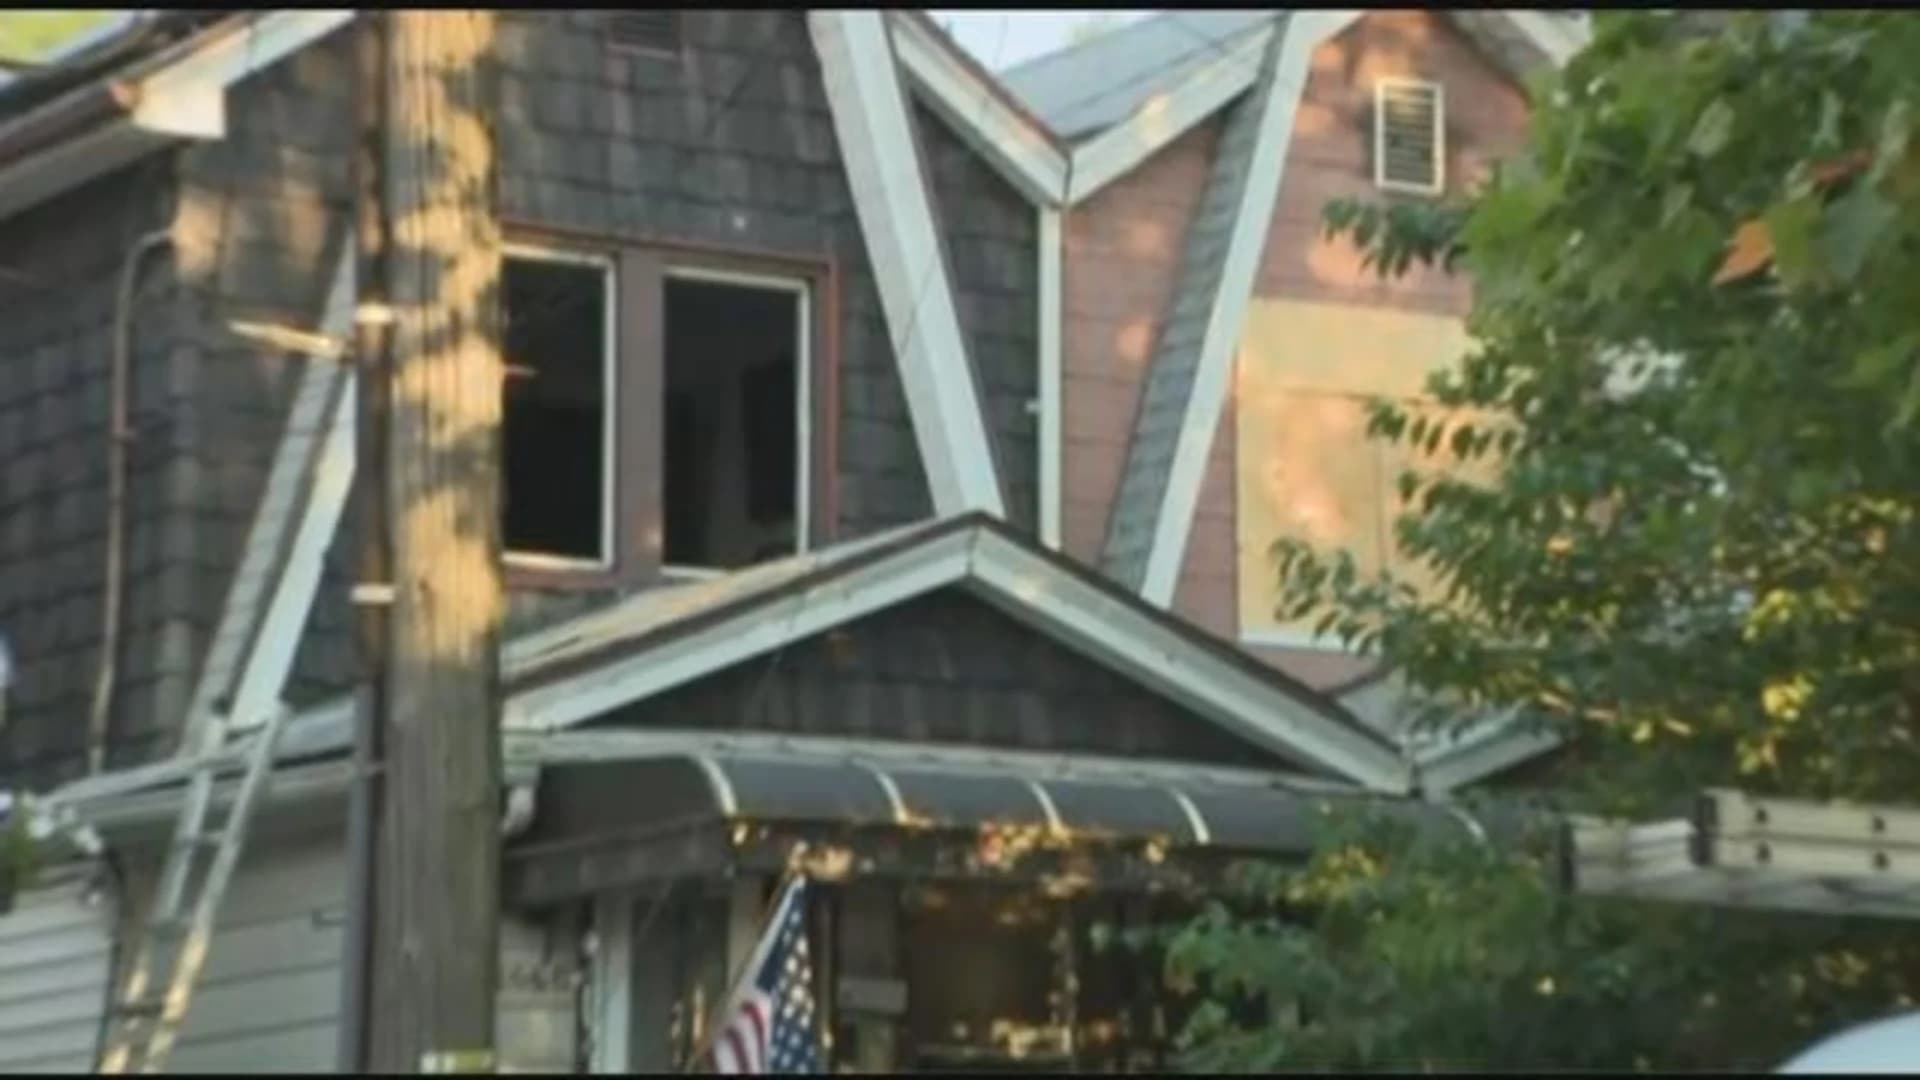 Officials: Woman dies in Brooklyn house fire